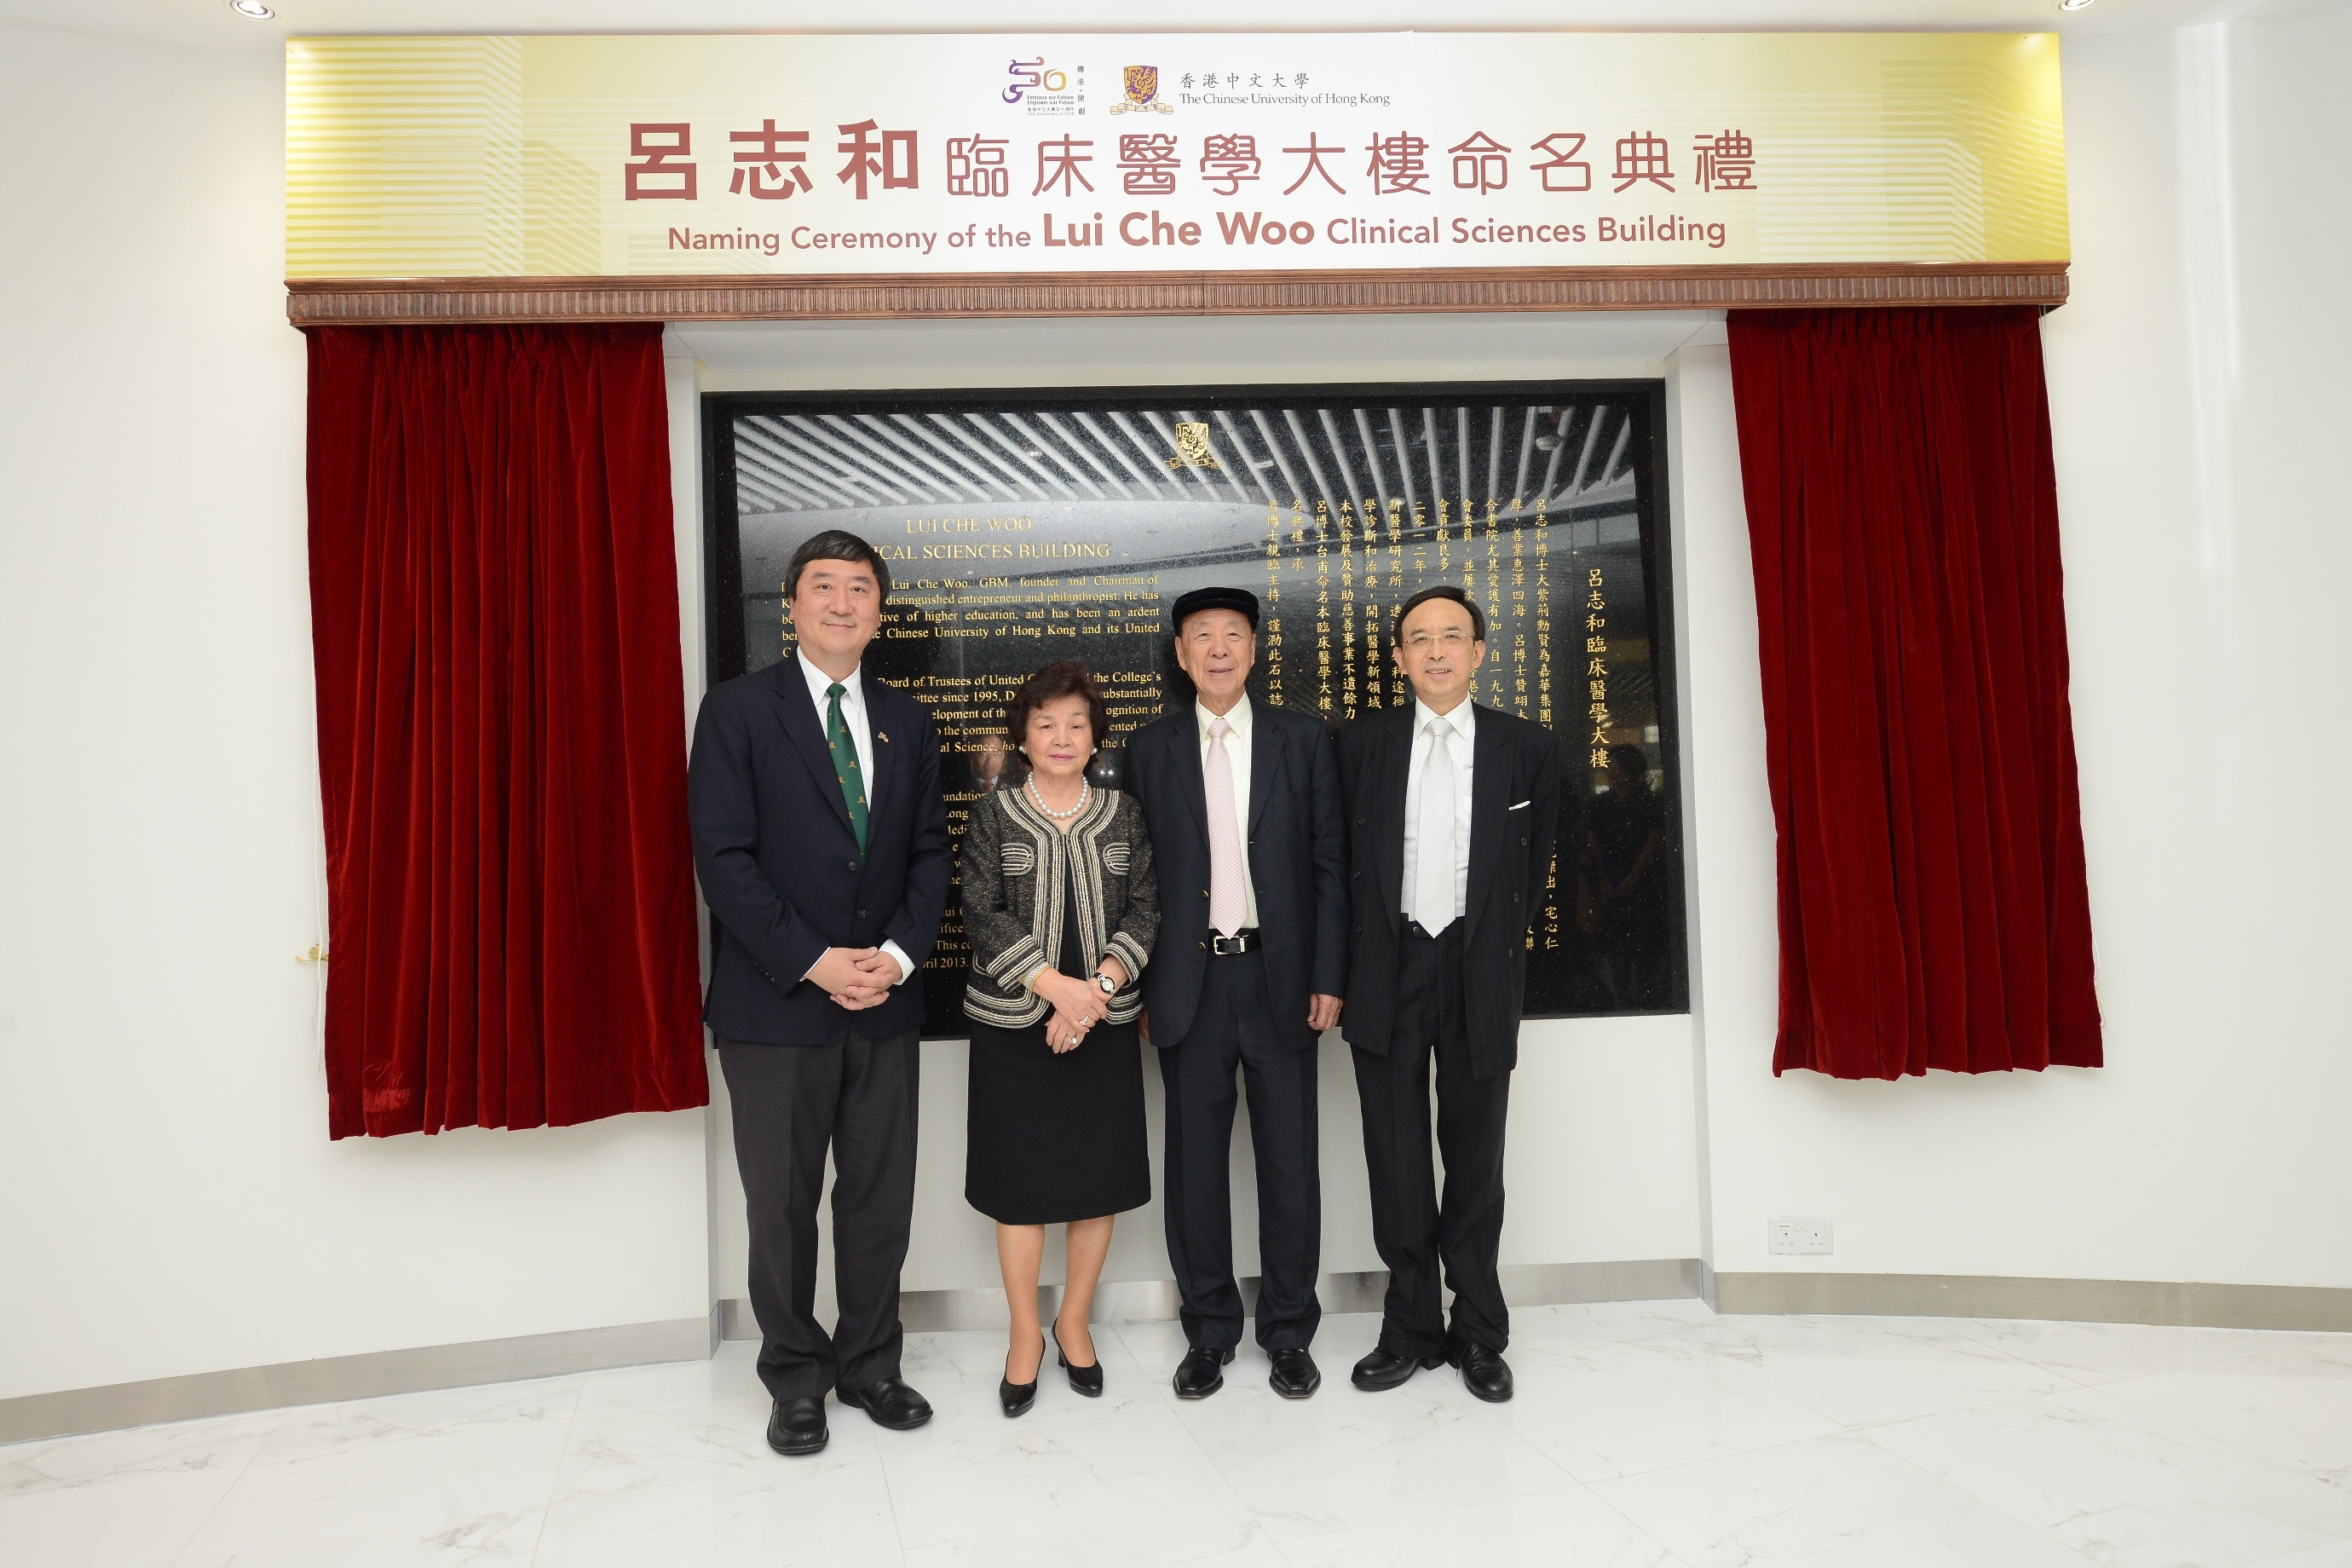 (From left) Prof. Joseph Sung, Vice-Chancellor and President, CUHK; Dr. and Mrs. Lui Che Woo; and Dr. Vincent Cheng, Council Chairman, CUHK unveil the plaque of the Lui Che Woo Clinical Sciences Building.